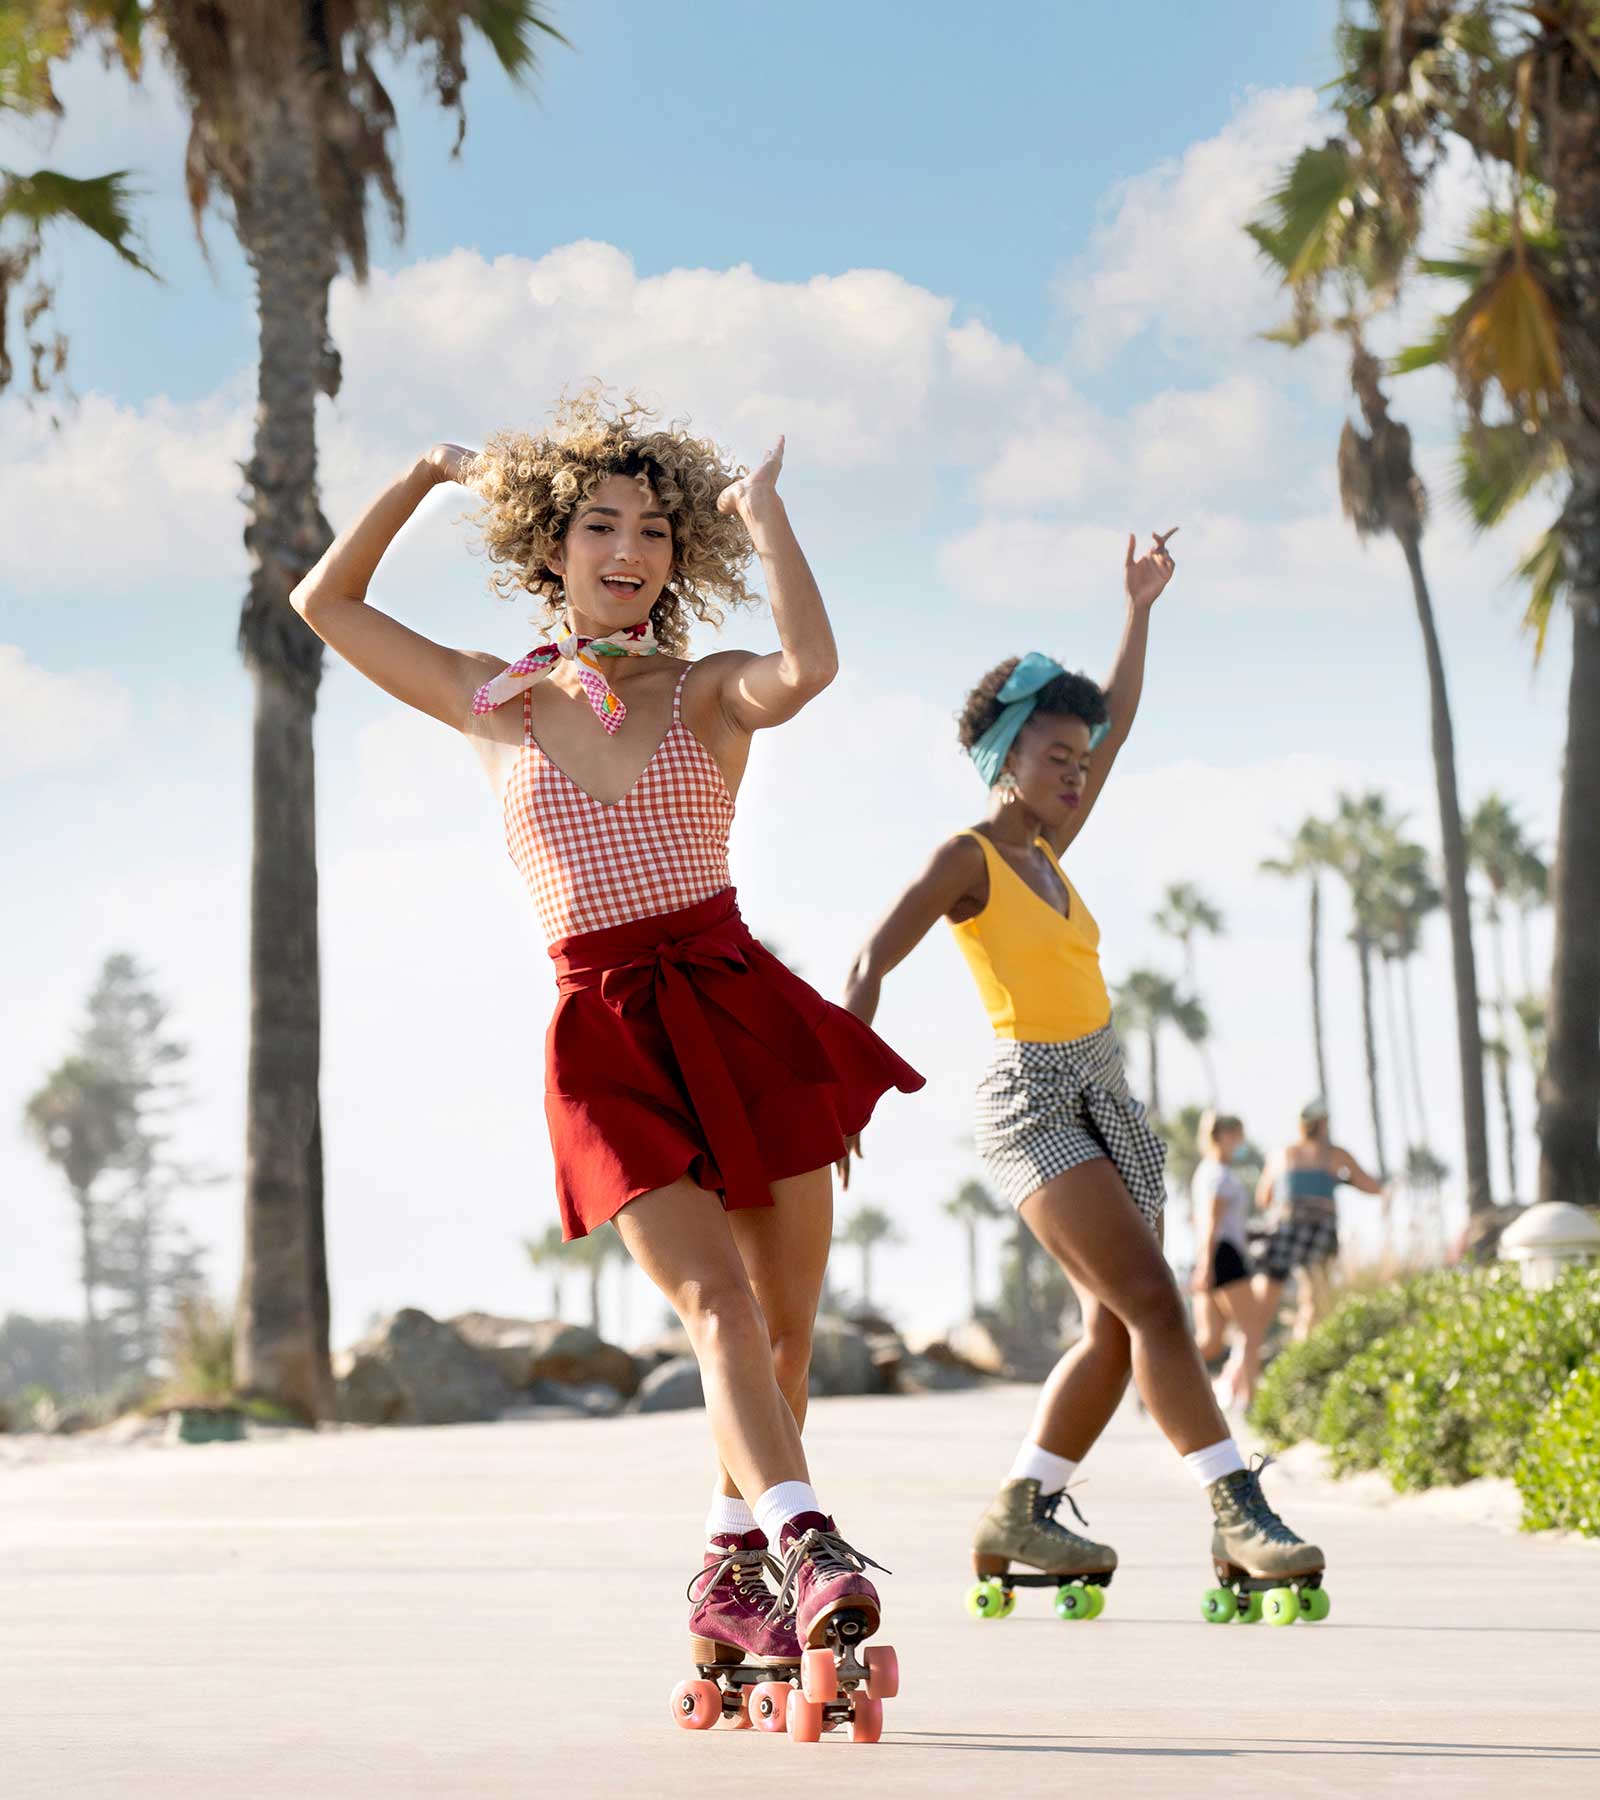 Women roller skating by the beach